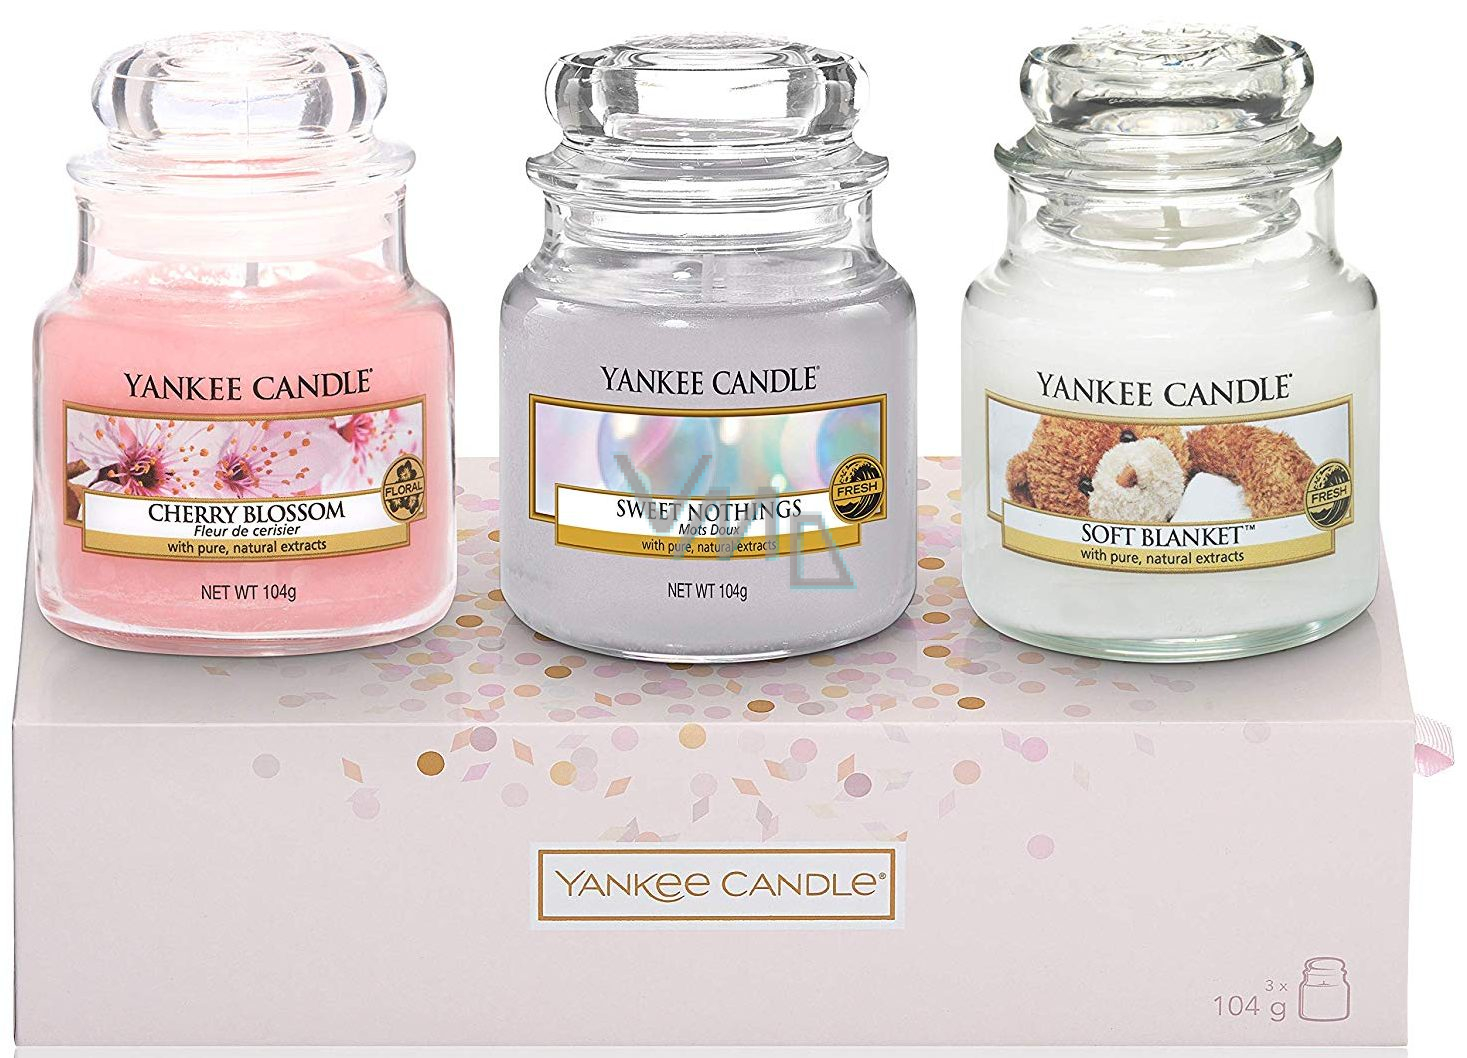 Yankee Candle Everyday Sweet Nothings - Sweet Nothing + Soft Blanket - Soft  Blanket + Cherry Blossom - Cherry Blossom Scented Candle Classic Small  Glass 3 x 104 g, Gift Set 2019 - VMD parfumerie - drogerie